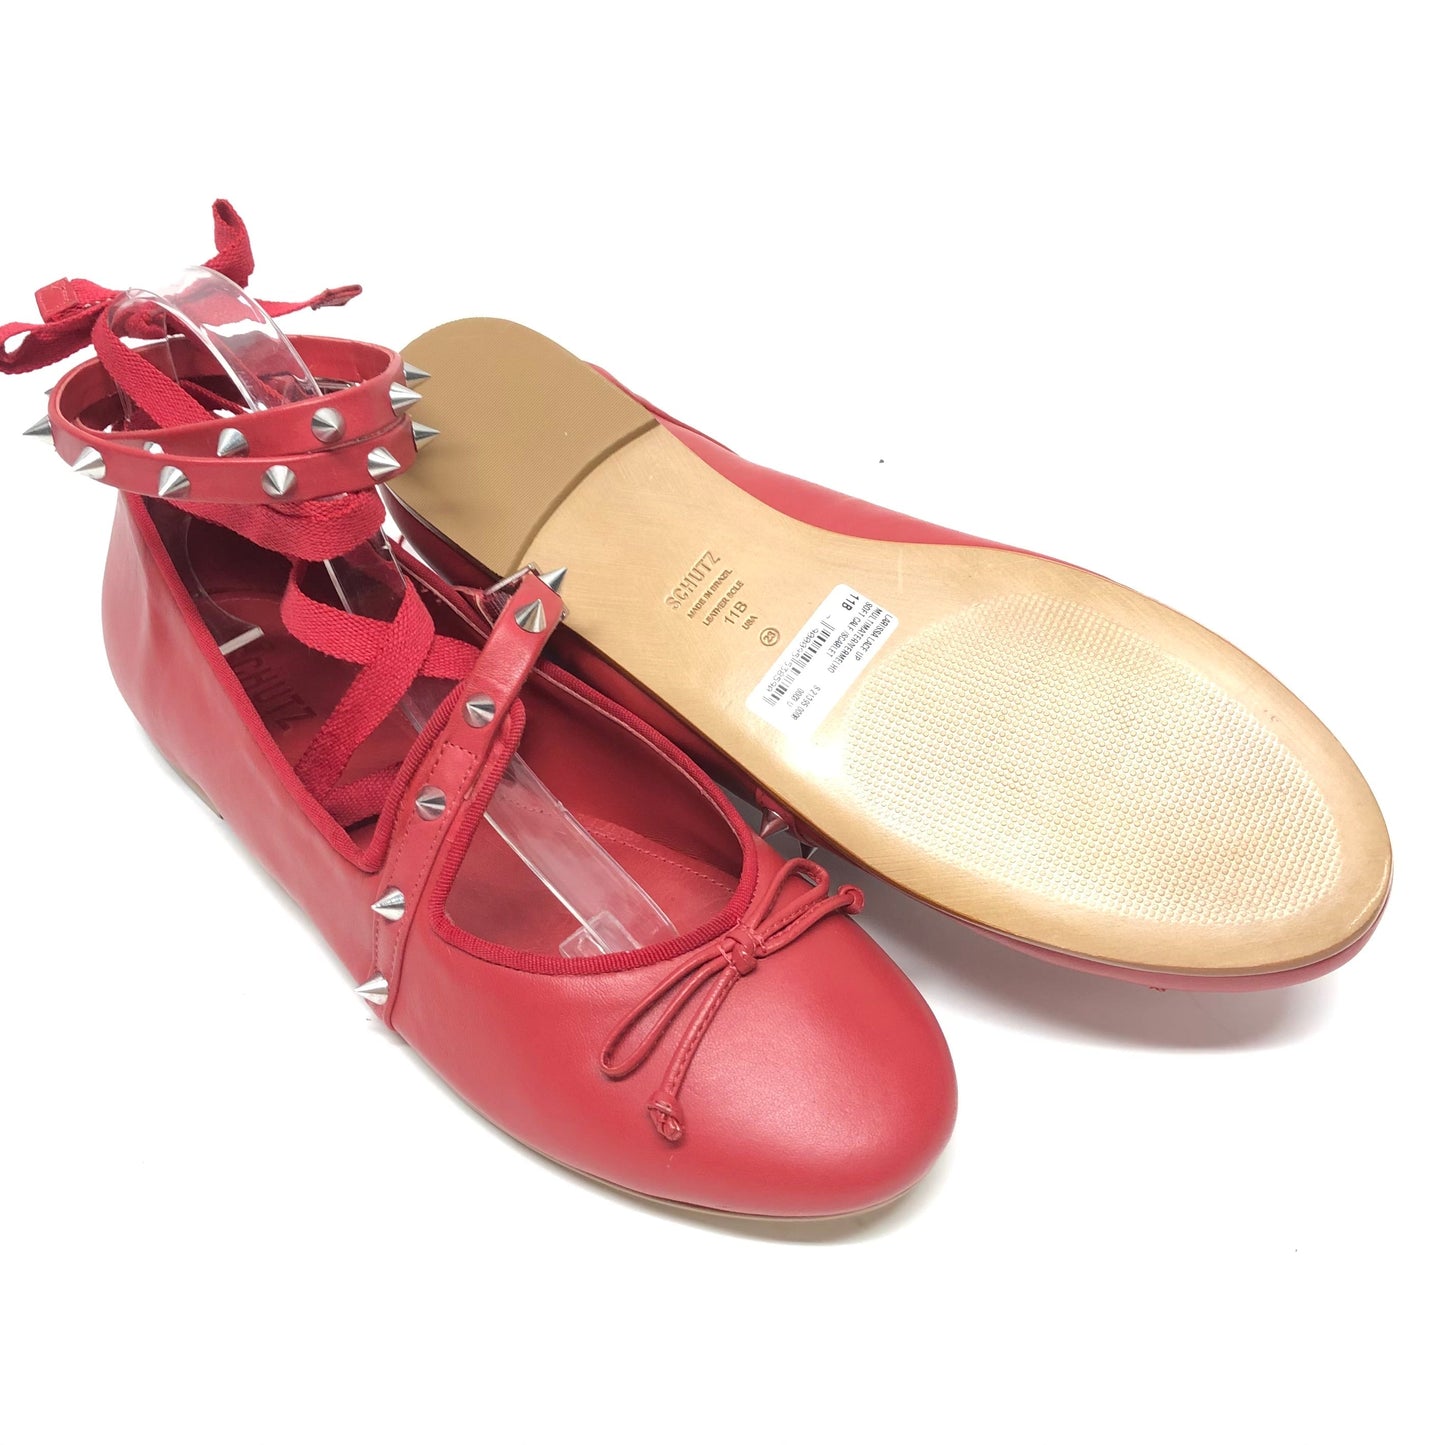 Shoes Flats Ballet By Cmb  Size: 11